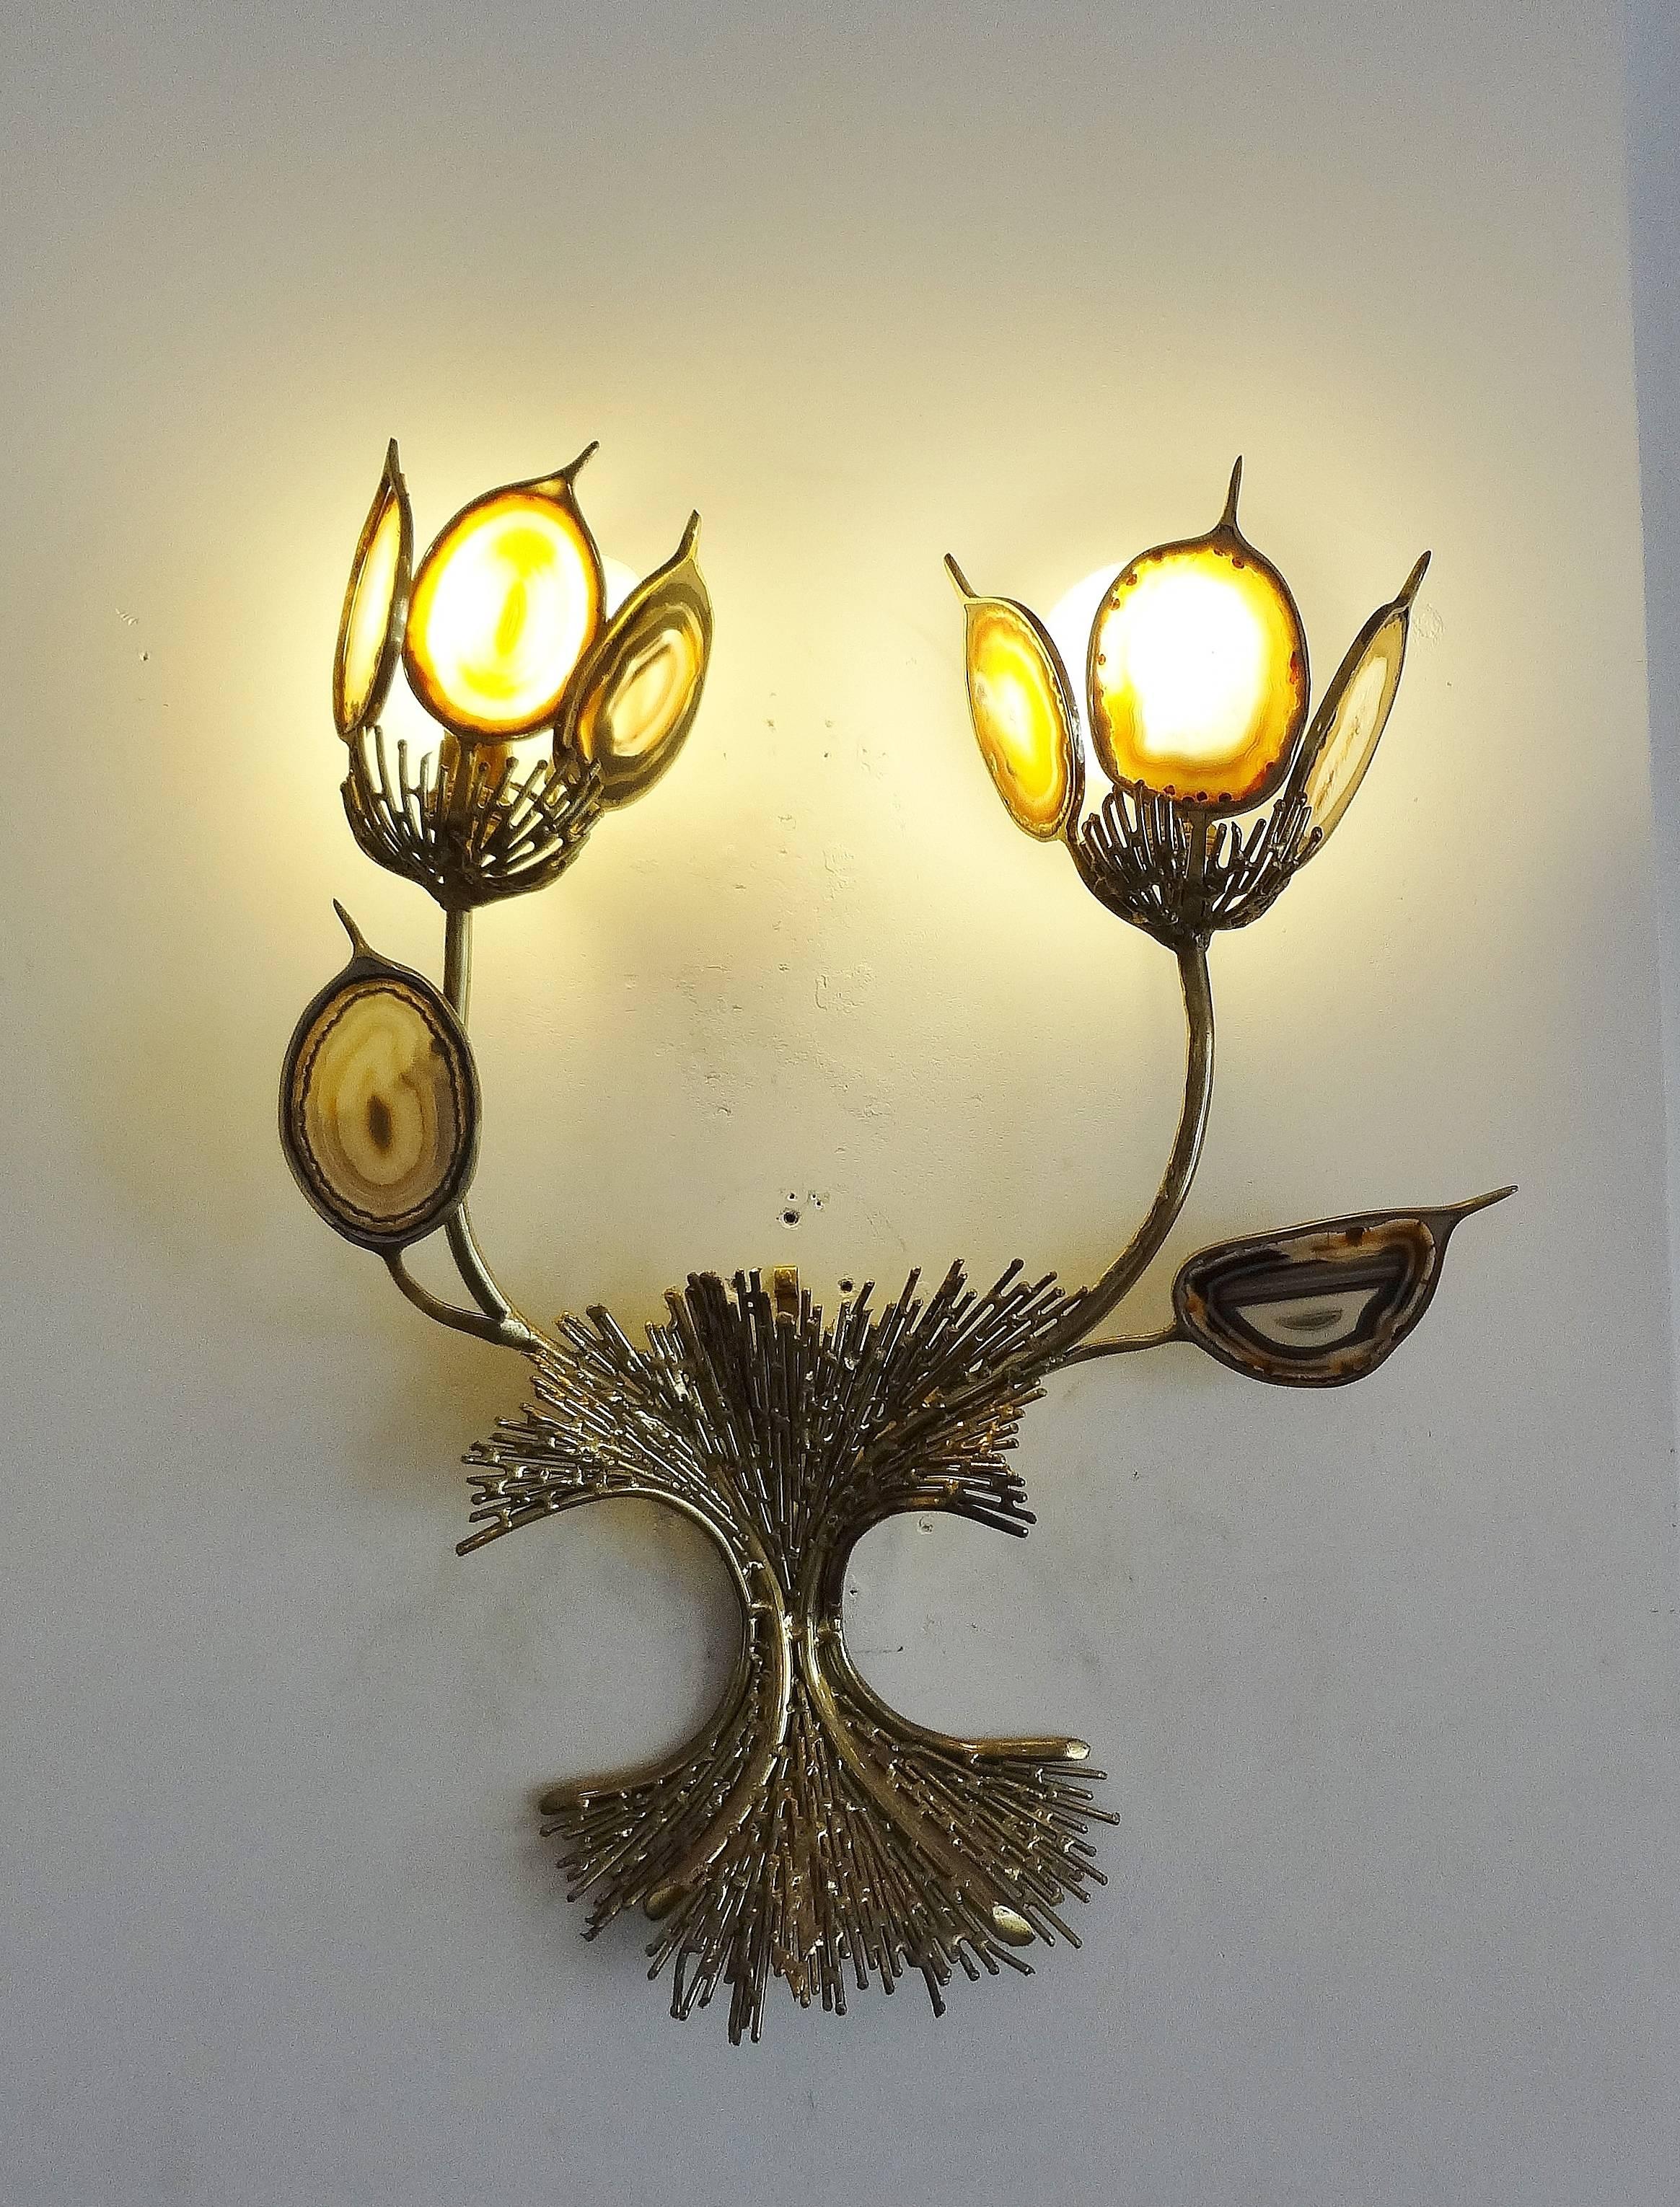 Aesthetic Movement Pair of Foliated Wall-Lights by J.Duval Brasseur, 1970s For Sale